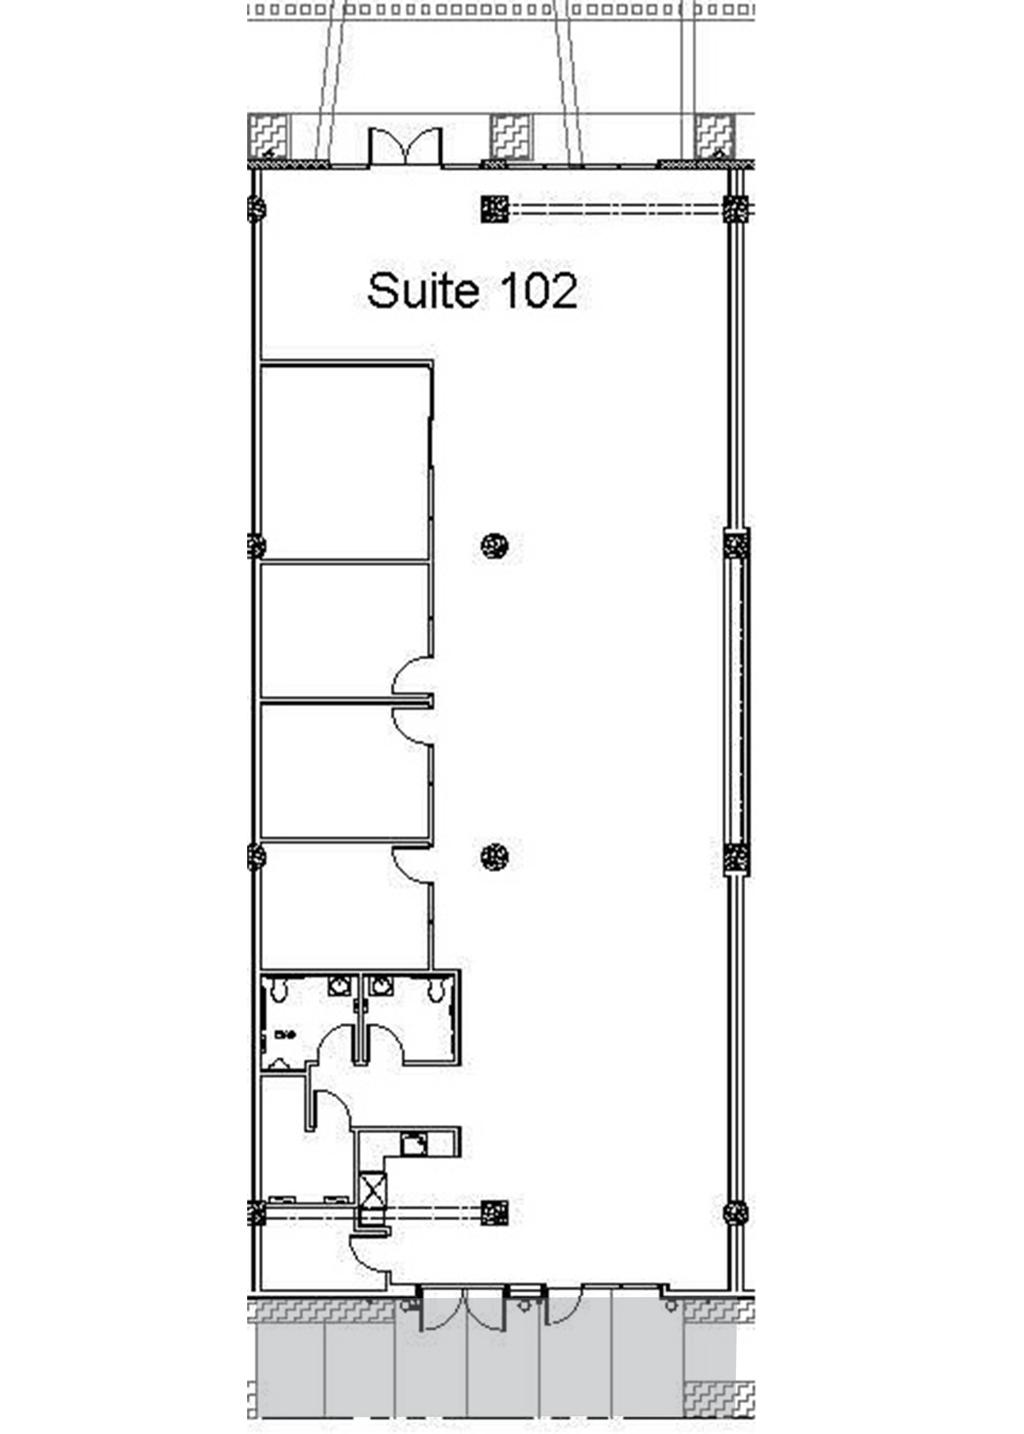 Suite 102-4,893 rsf Building 1, Suite 102 Features Large conference room with sliding glass doors Three private offices or break-out rooms Large open area with 22 high